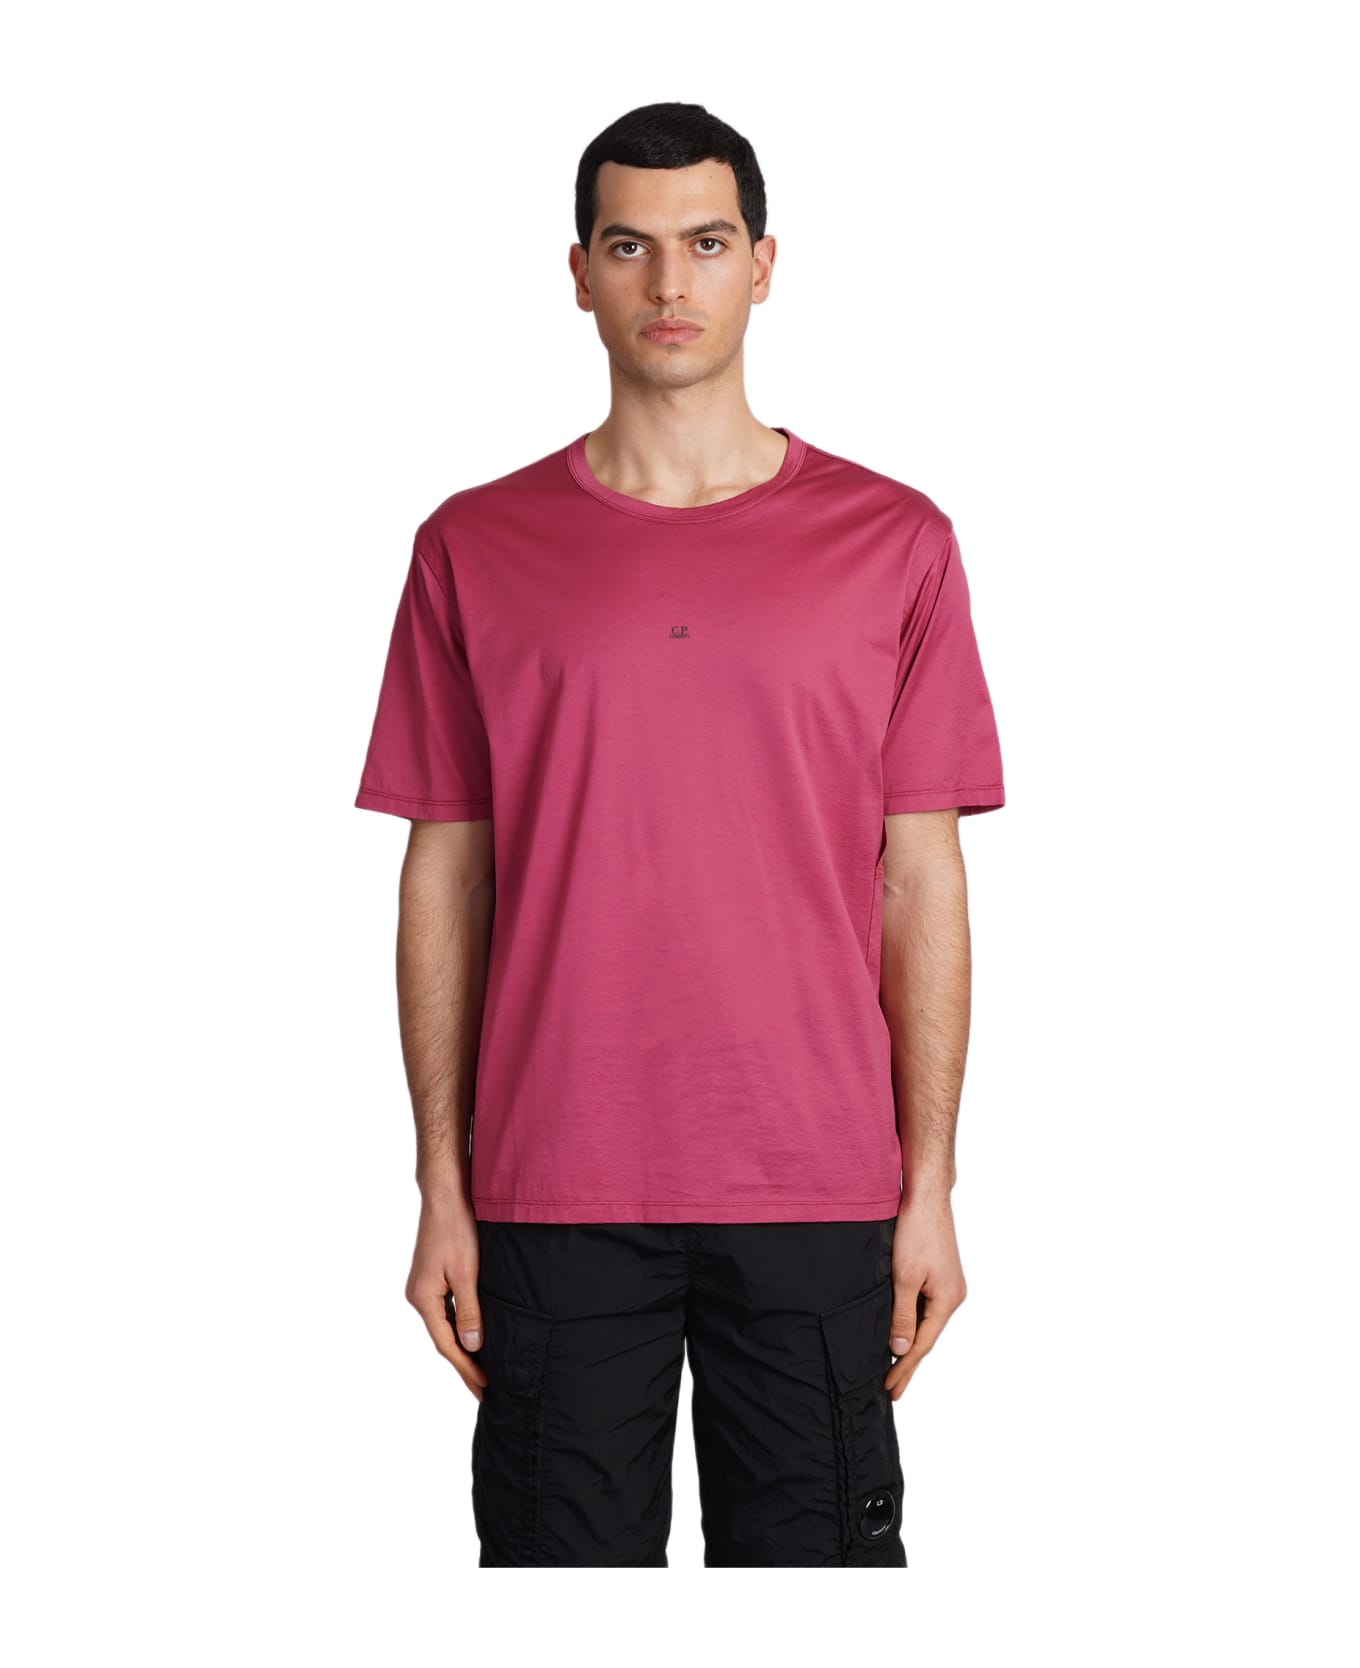 C.P. Company T-shirt In Red Cotton - red